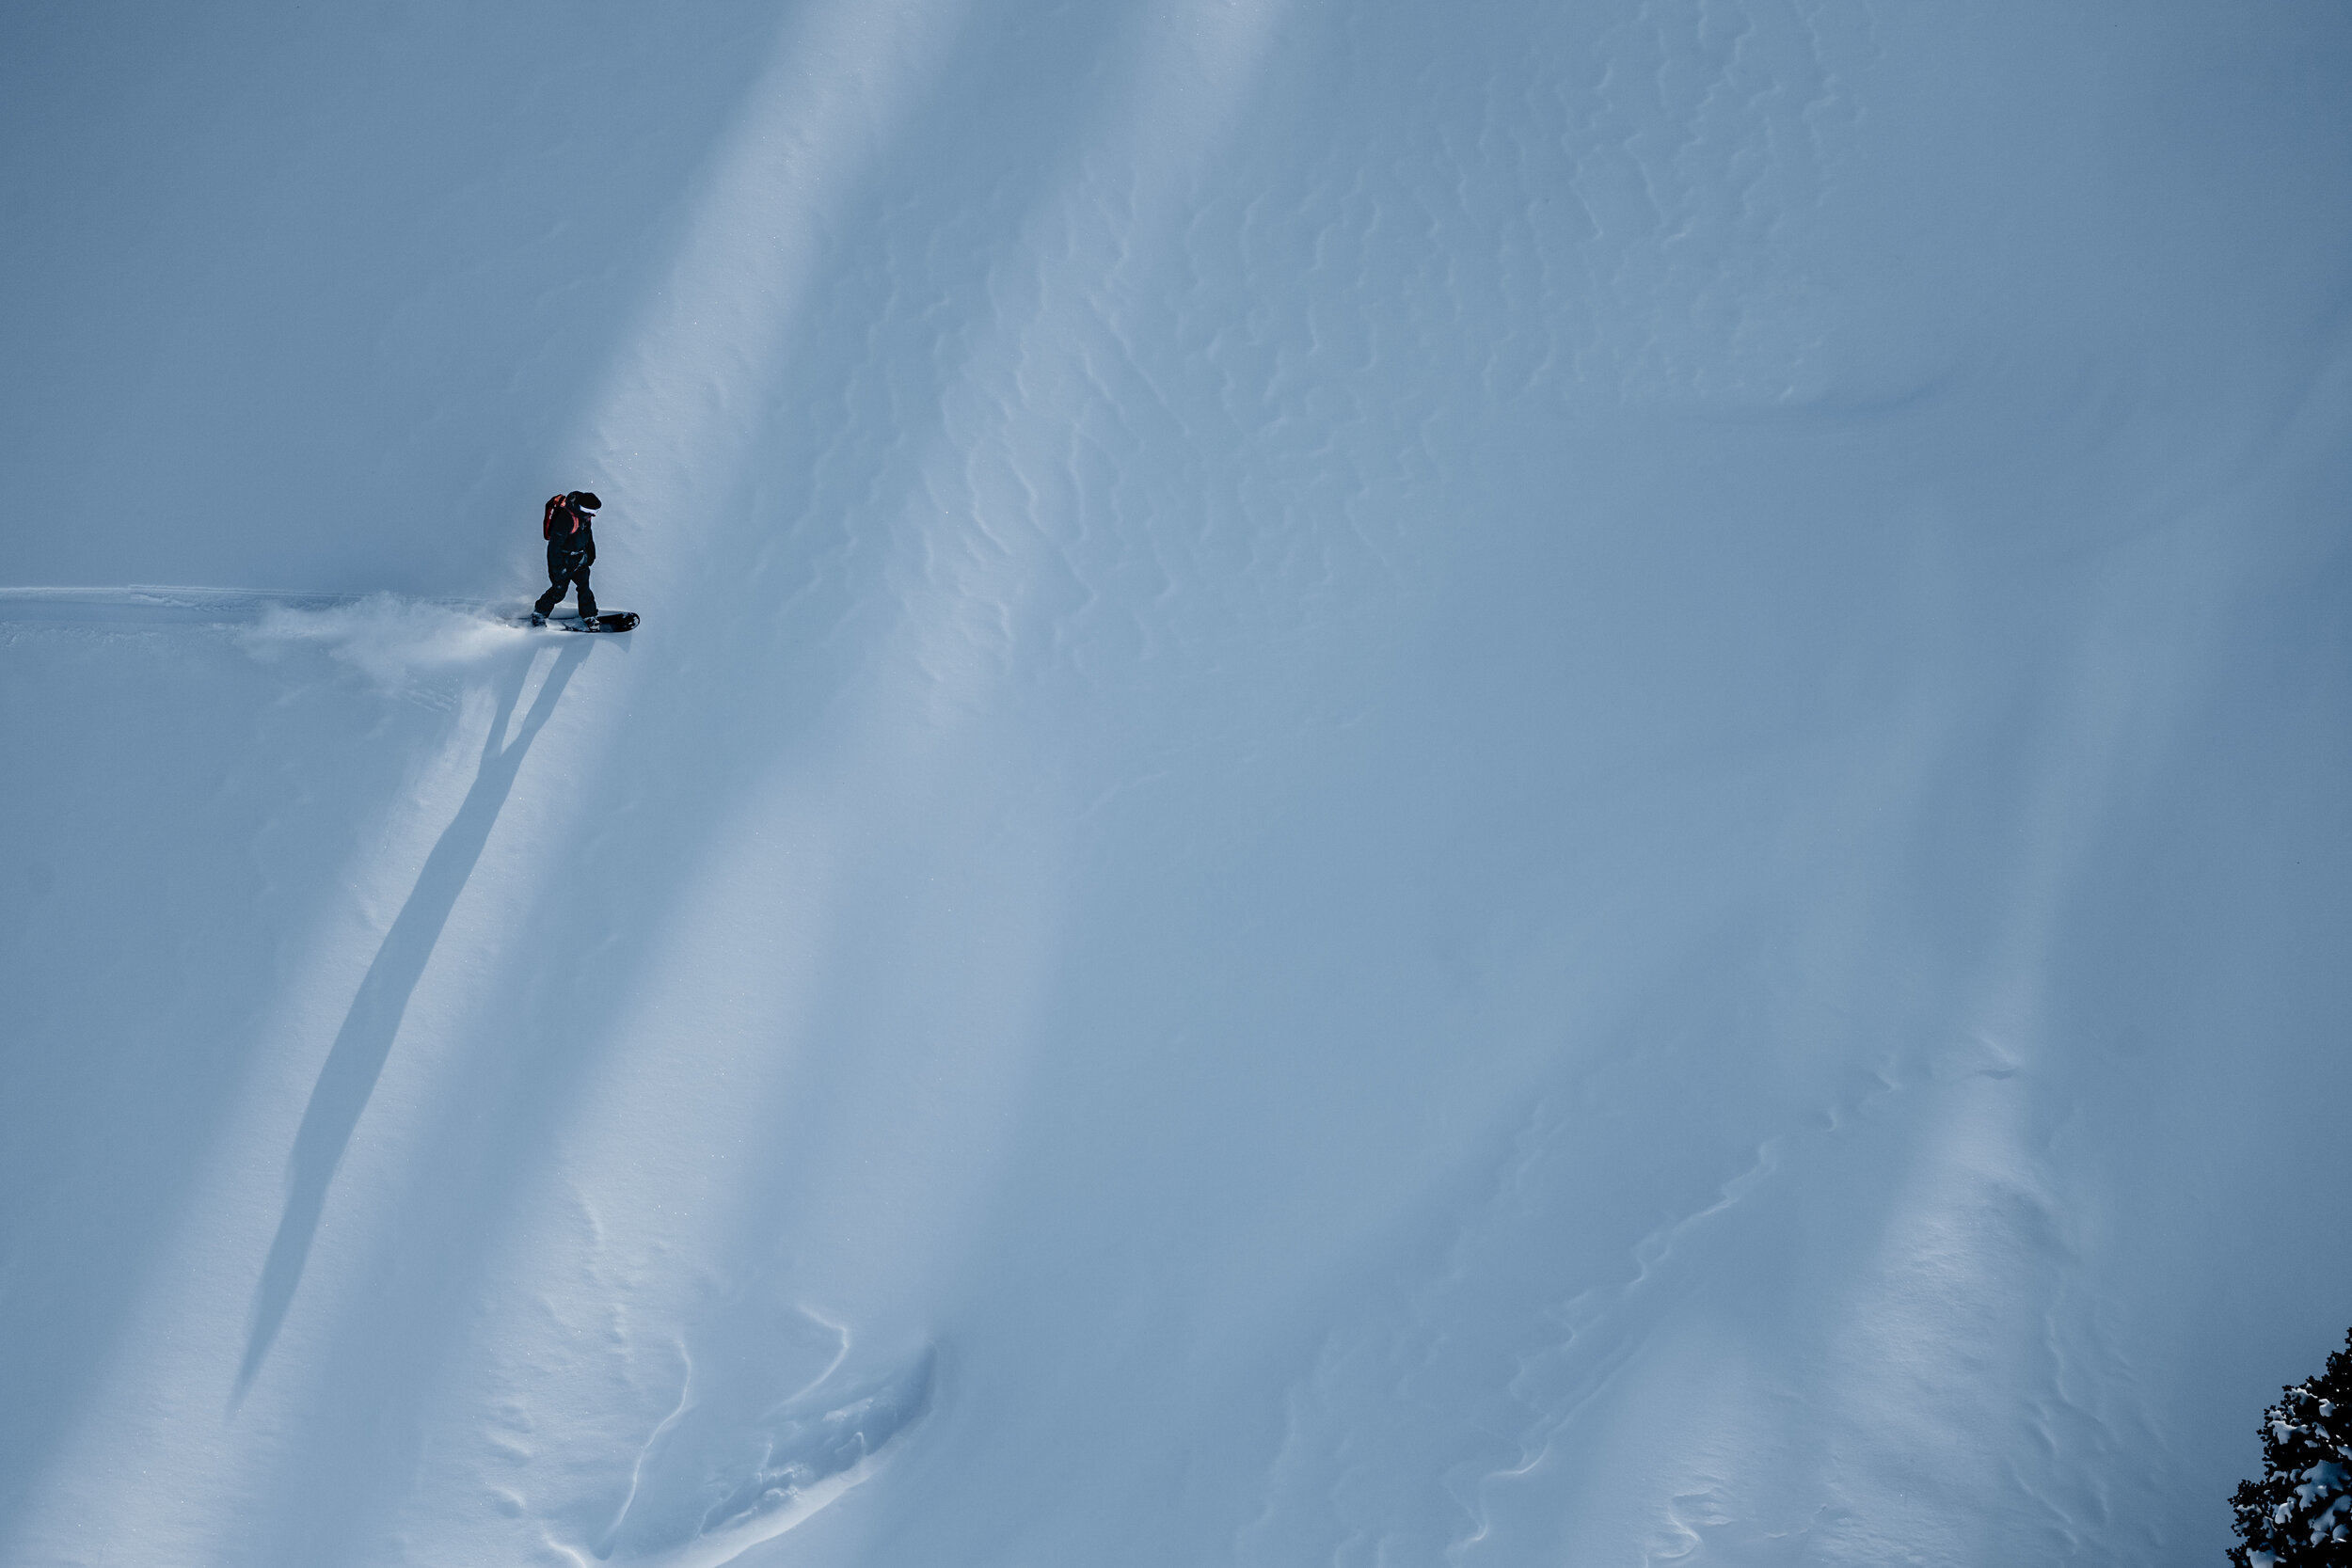   Backcountry Gear &amp; Apparel Winter ’19    Pursuits : Helicopter Skiing, Backcountry Skiing, and Resort Skiing    Location : Little Cottonwood Canyon, UT    Producer : Tyler Arrivillaga   Photographers : Re Wikstrom &amp; Ben Christensen 